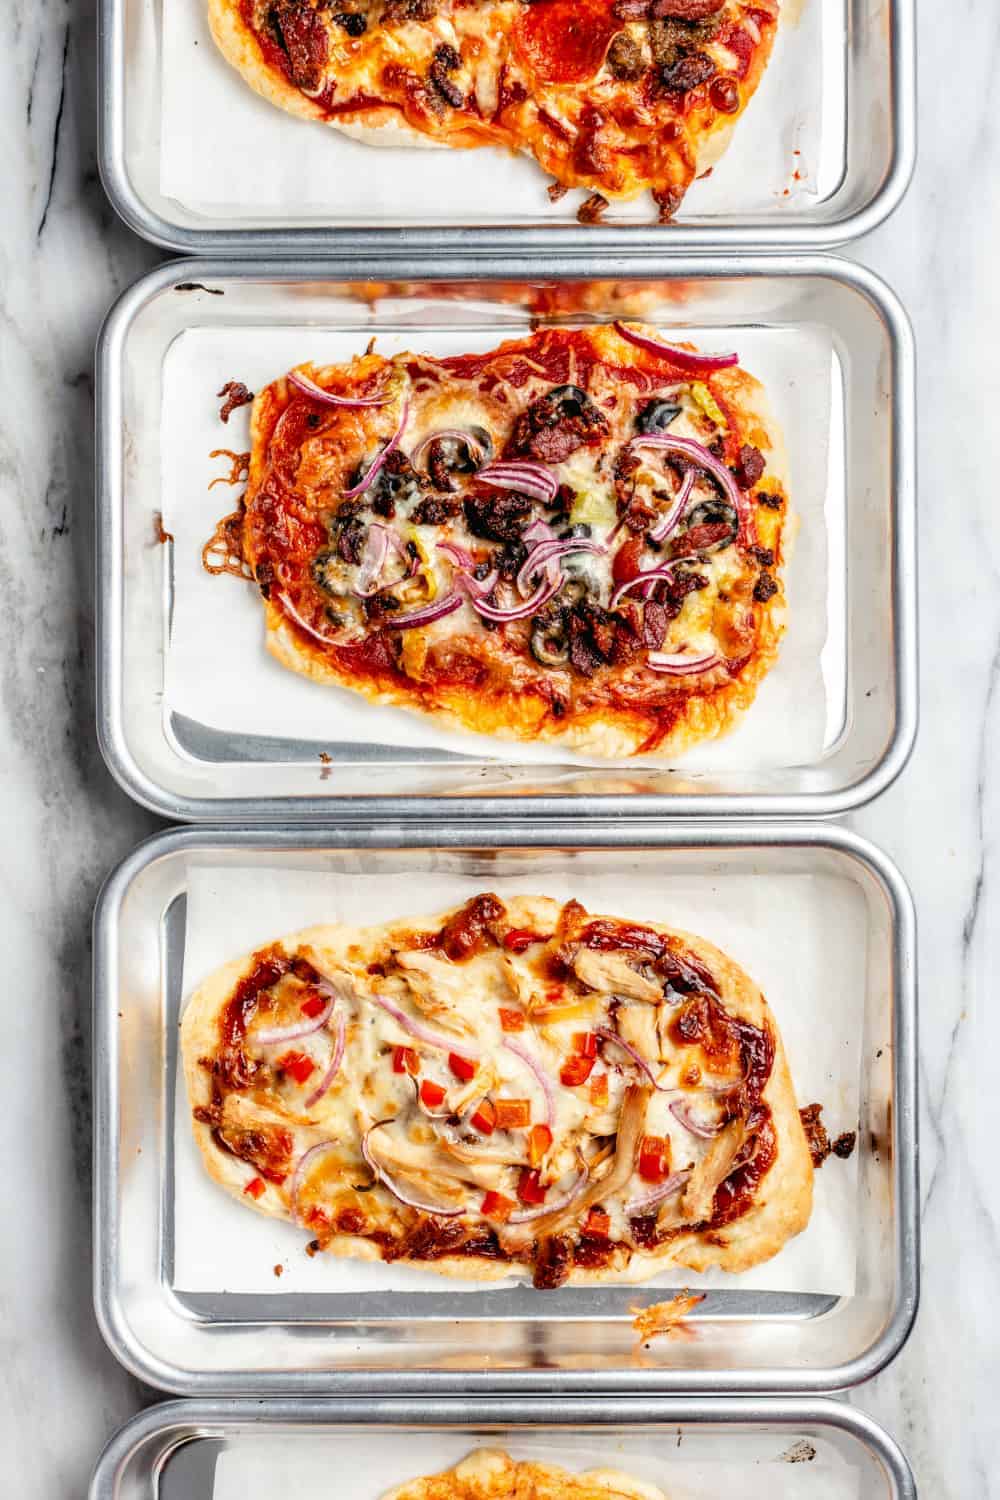 Assorted pizzas made with 30 minute pizza crust on mini baking sheets